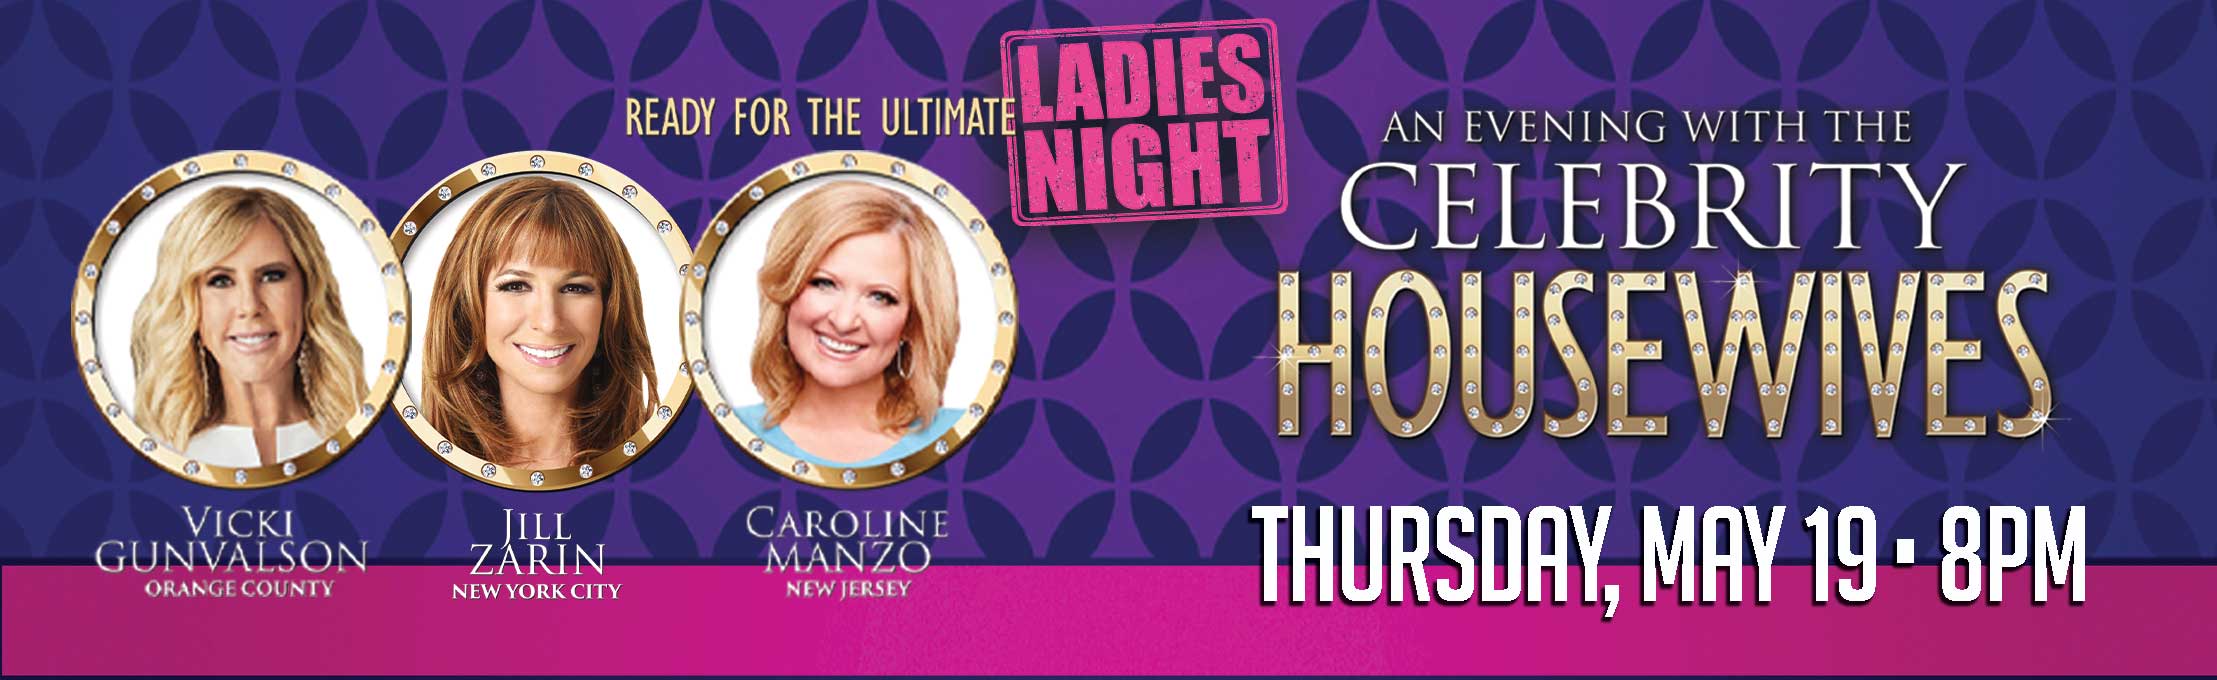 An Evening with the Celebrity Housewives